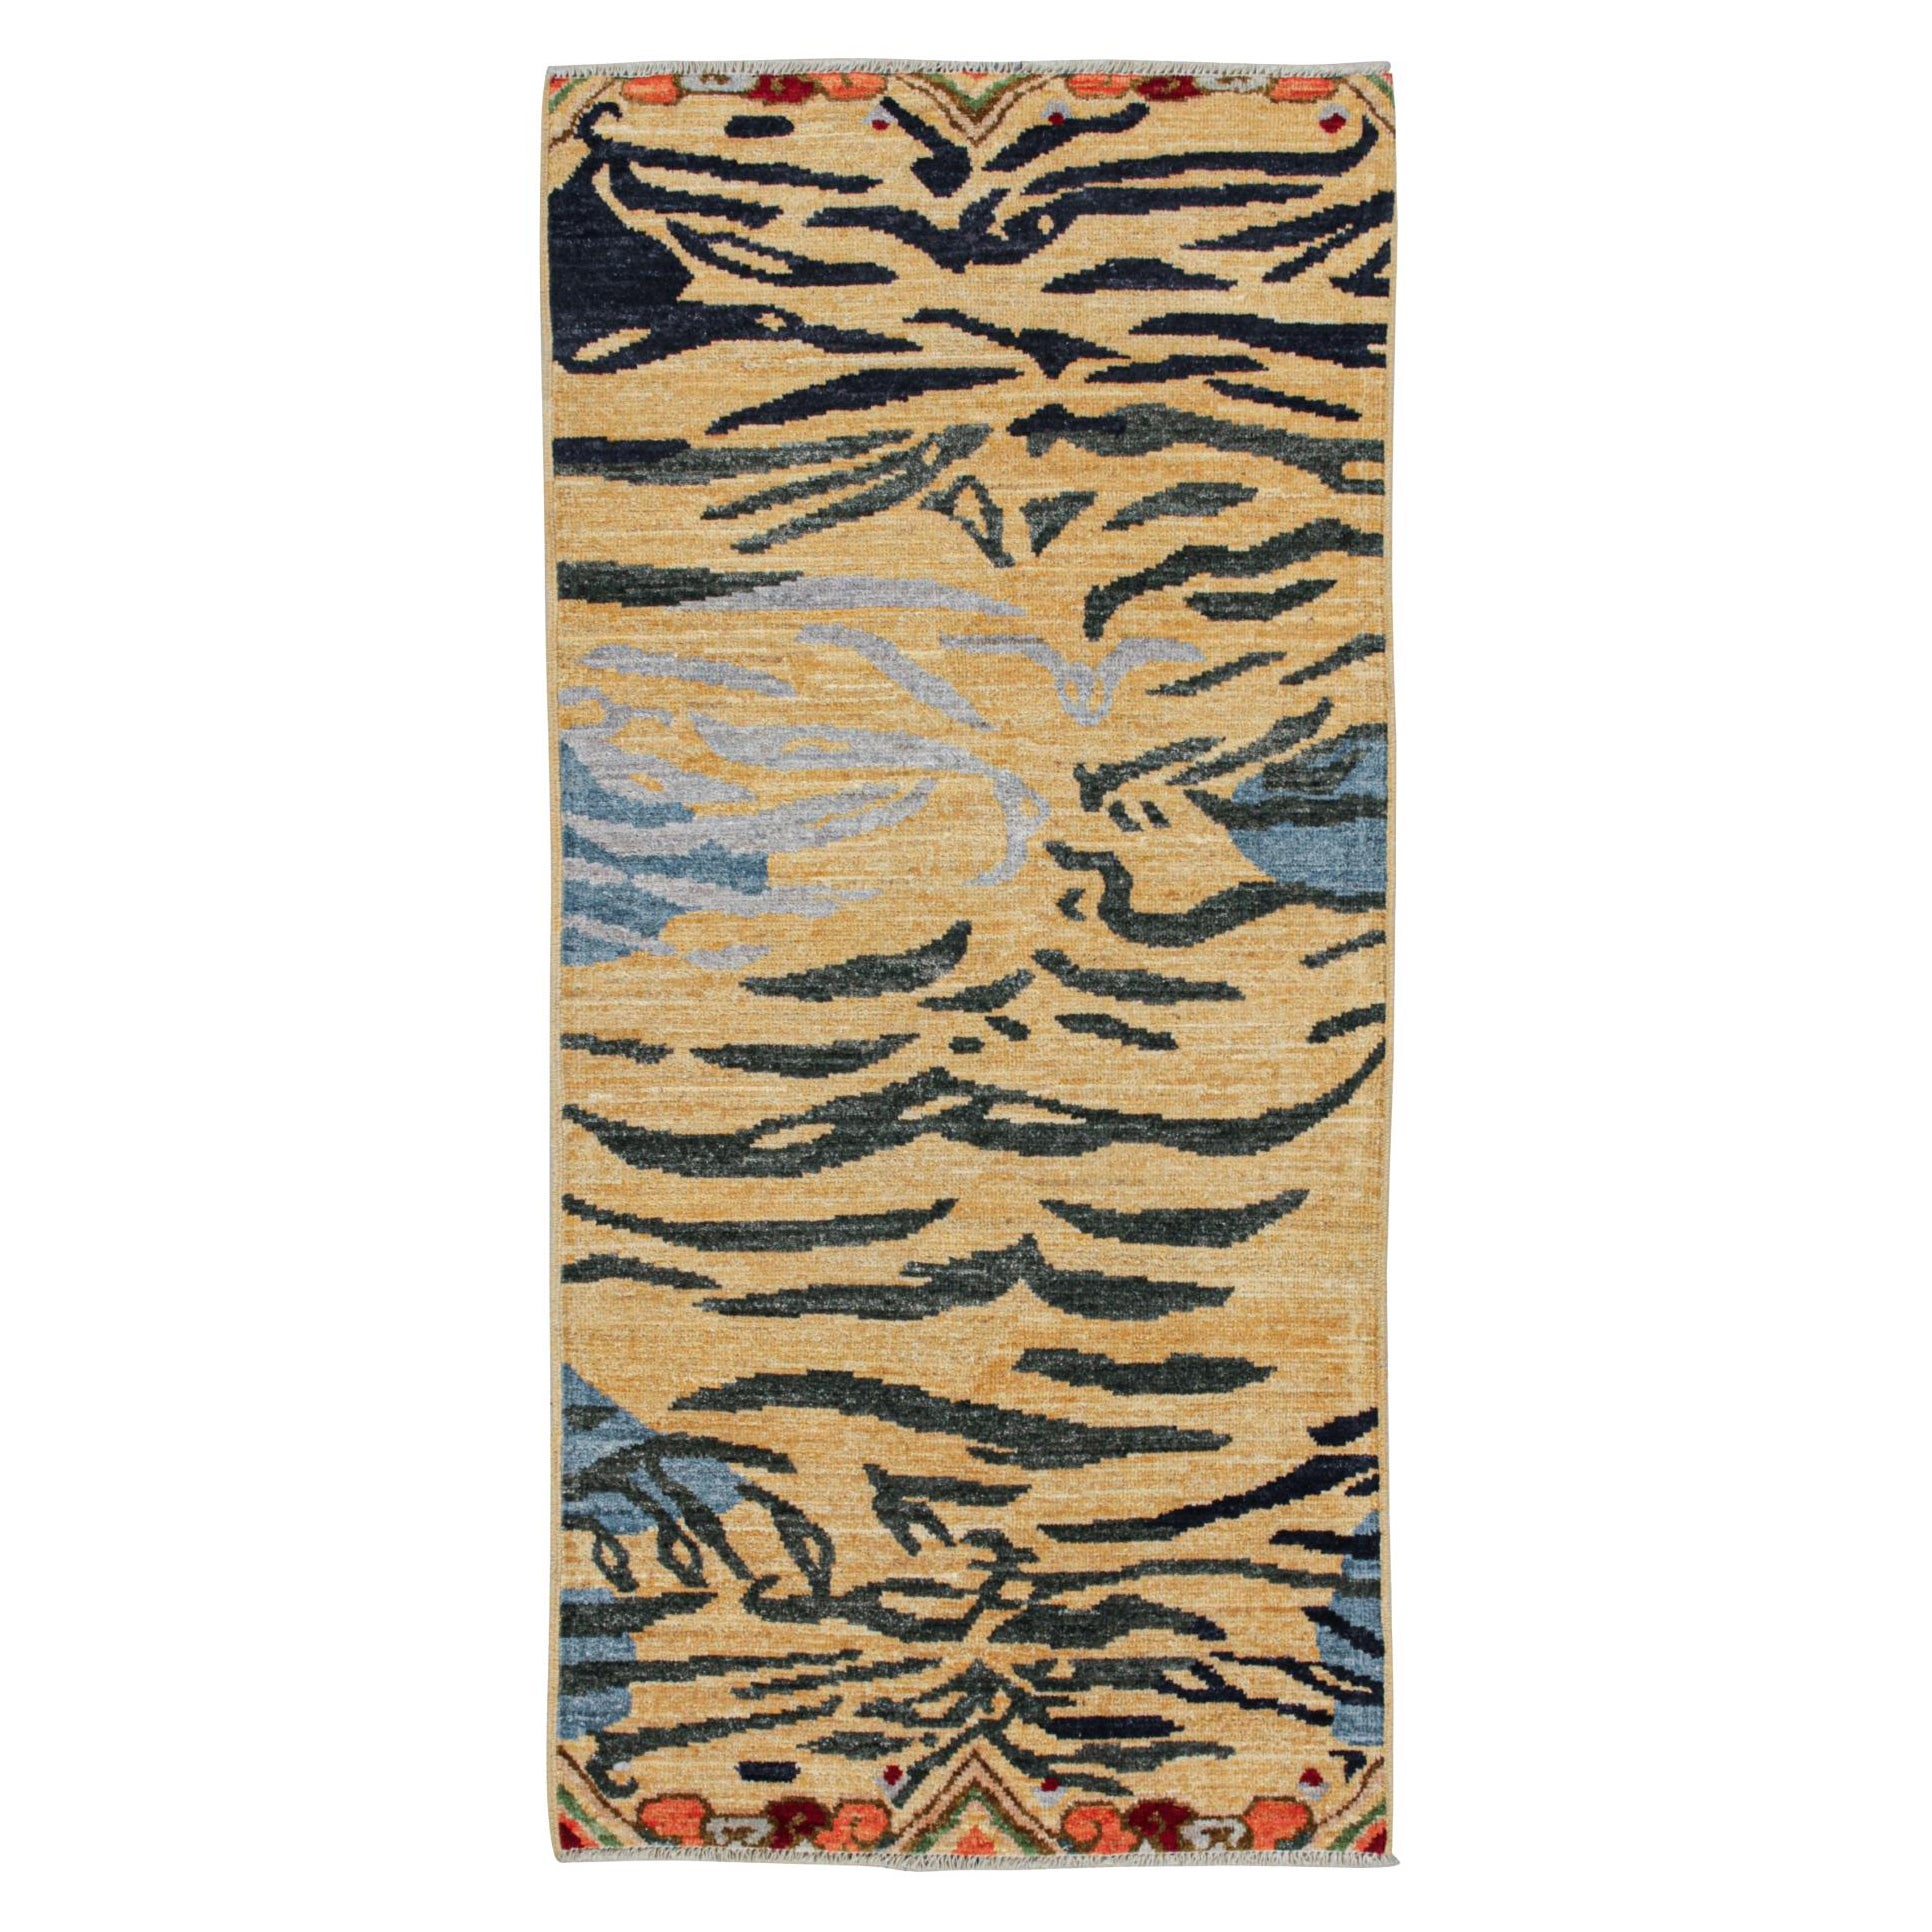 Tapis & Kilim's Classic Style Tiger-Skin Runner in Gold with Gray and Blue Stripes (Tapis & Kilim's Classic Style Tiger-Skin Runner in Gold with Gray and Blue Stripes)